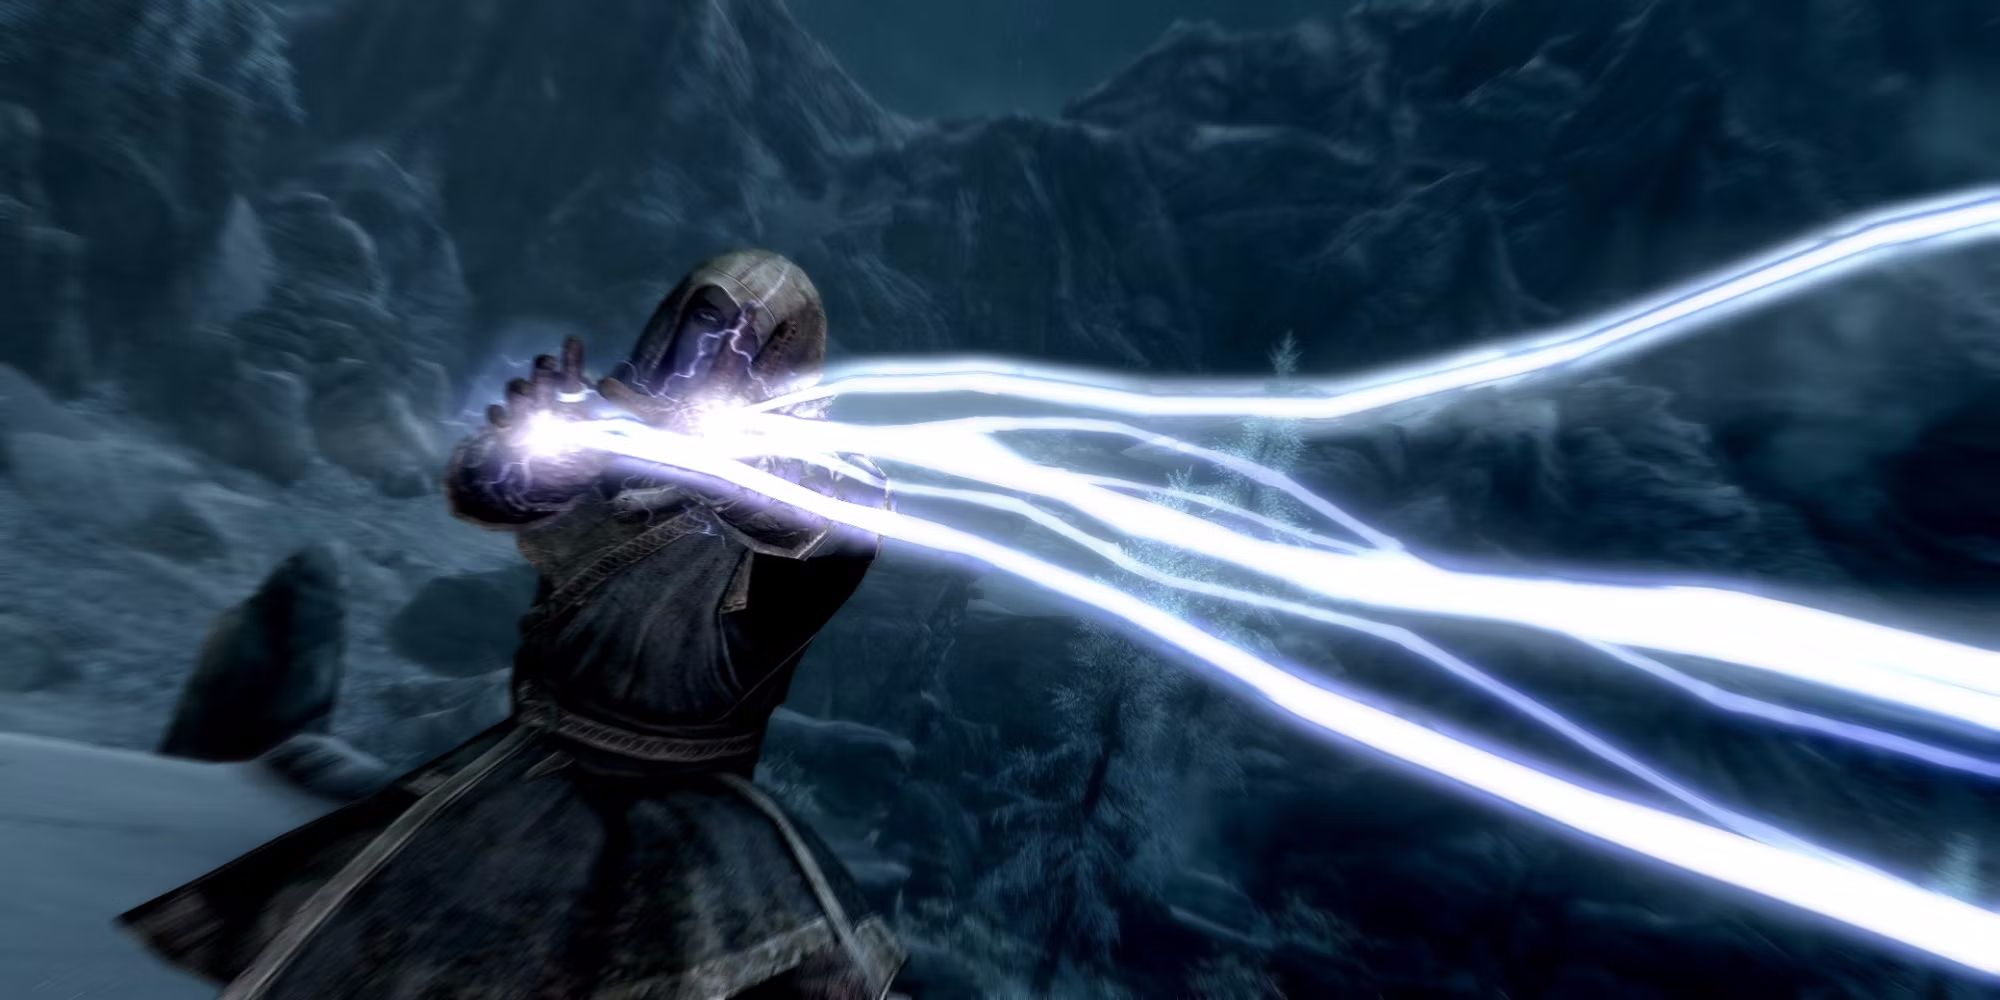 Cinematic view of the protagonist casting a spell in Skyrim